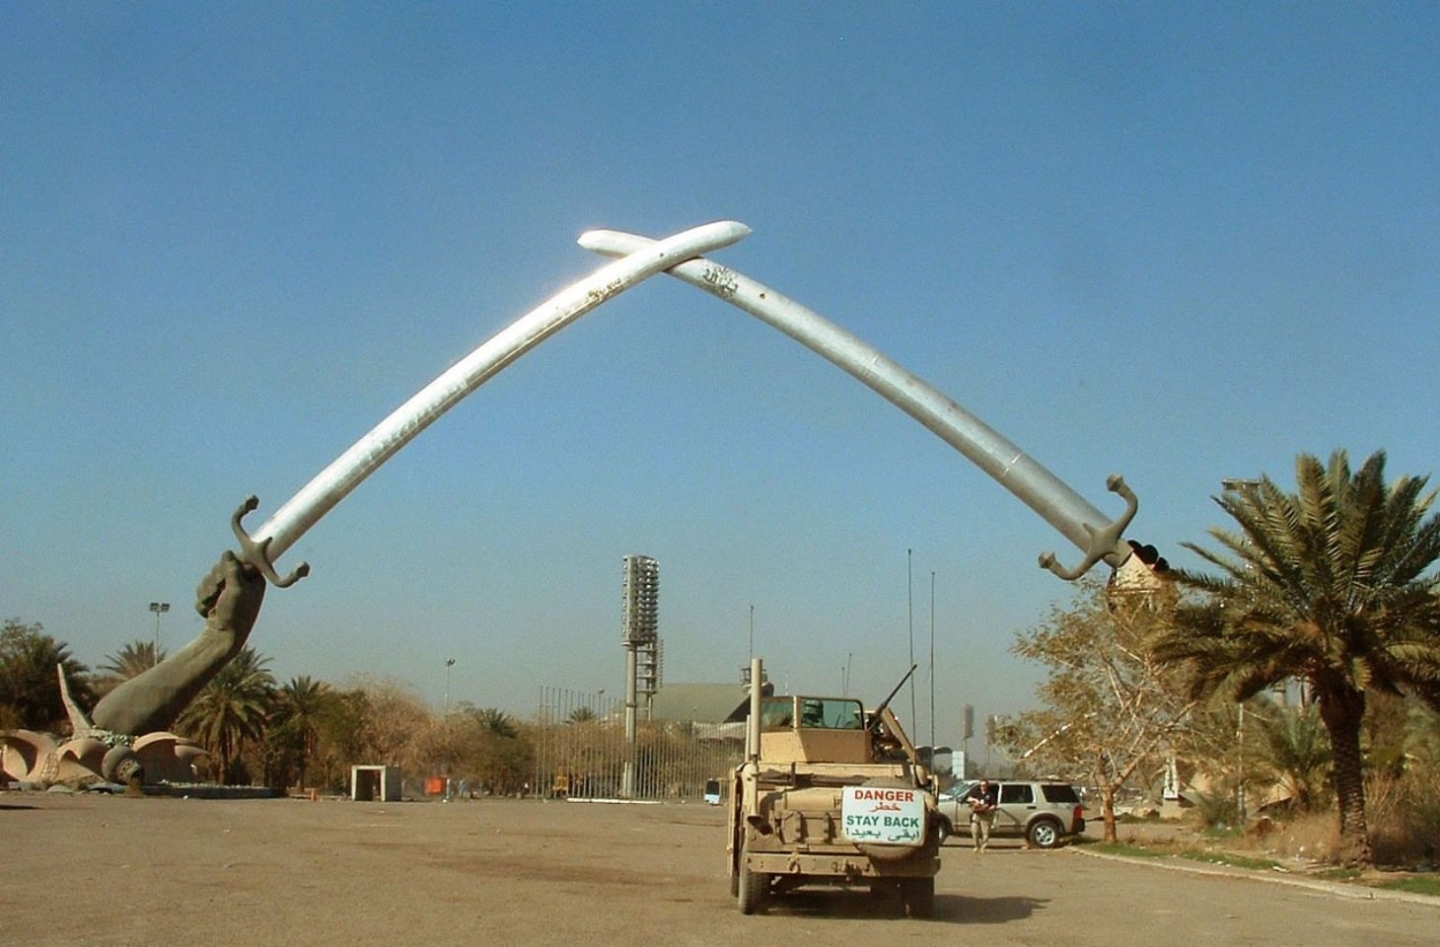 Gulf War Iraq Downloaded Free from Pixabay: The Victory Arch, Qaws an-Naṣr, Swords of Qādisīyah, Hands of Victory, Crossed Swords, triumphal arches Baghdad, Iraq.